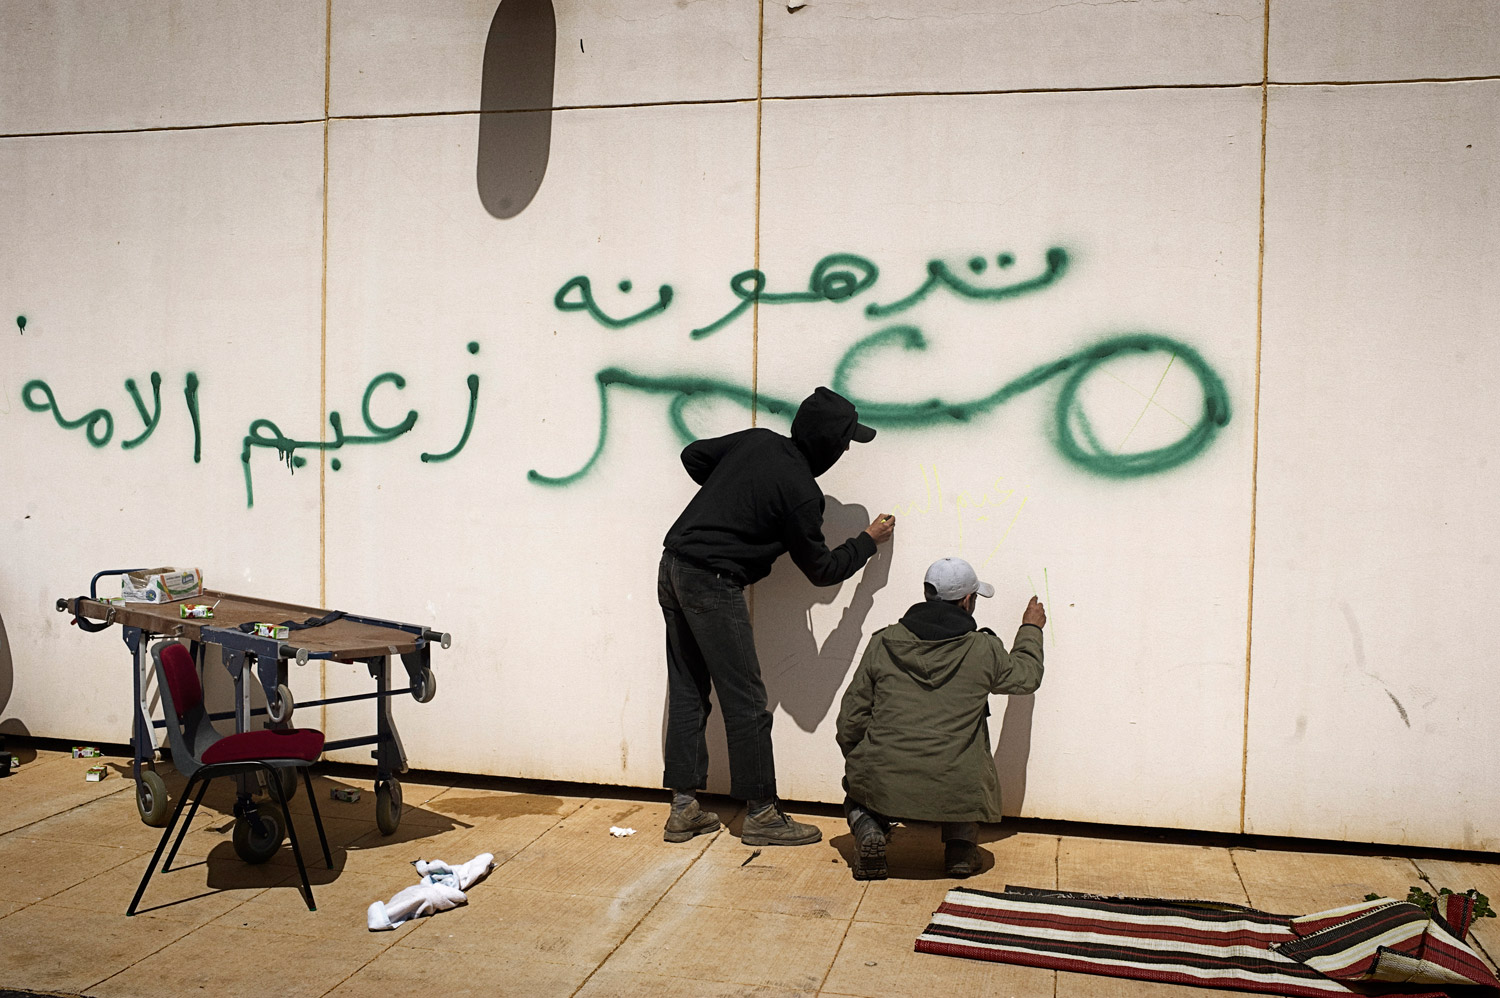 Yuri Kozyrev. From  Table of Contents.  April 11, 2011 issue.
                              
                              Libyan rebels scrawl graffiti on a wall near a hospital in Ras Lanuf on March 27, 2011. The wall was previously defaced, in green, by Gaddafi troops.